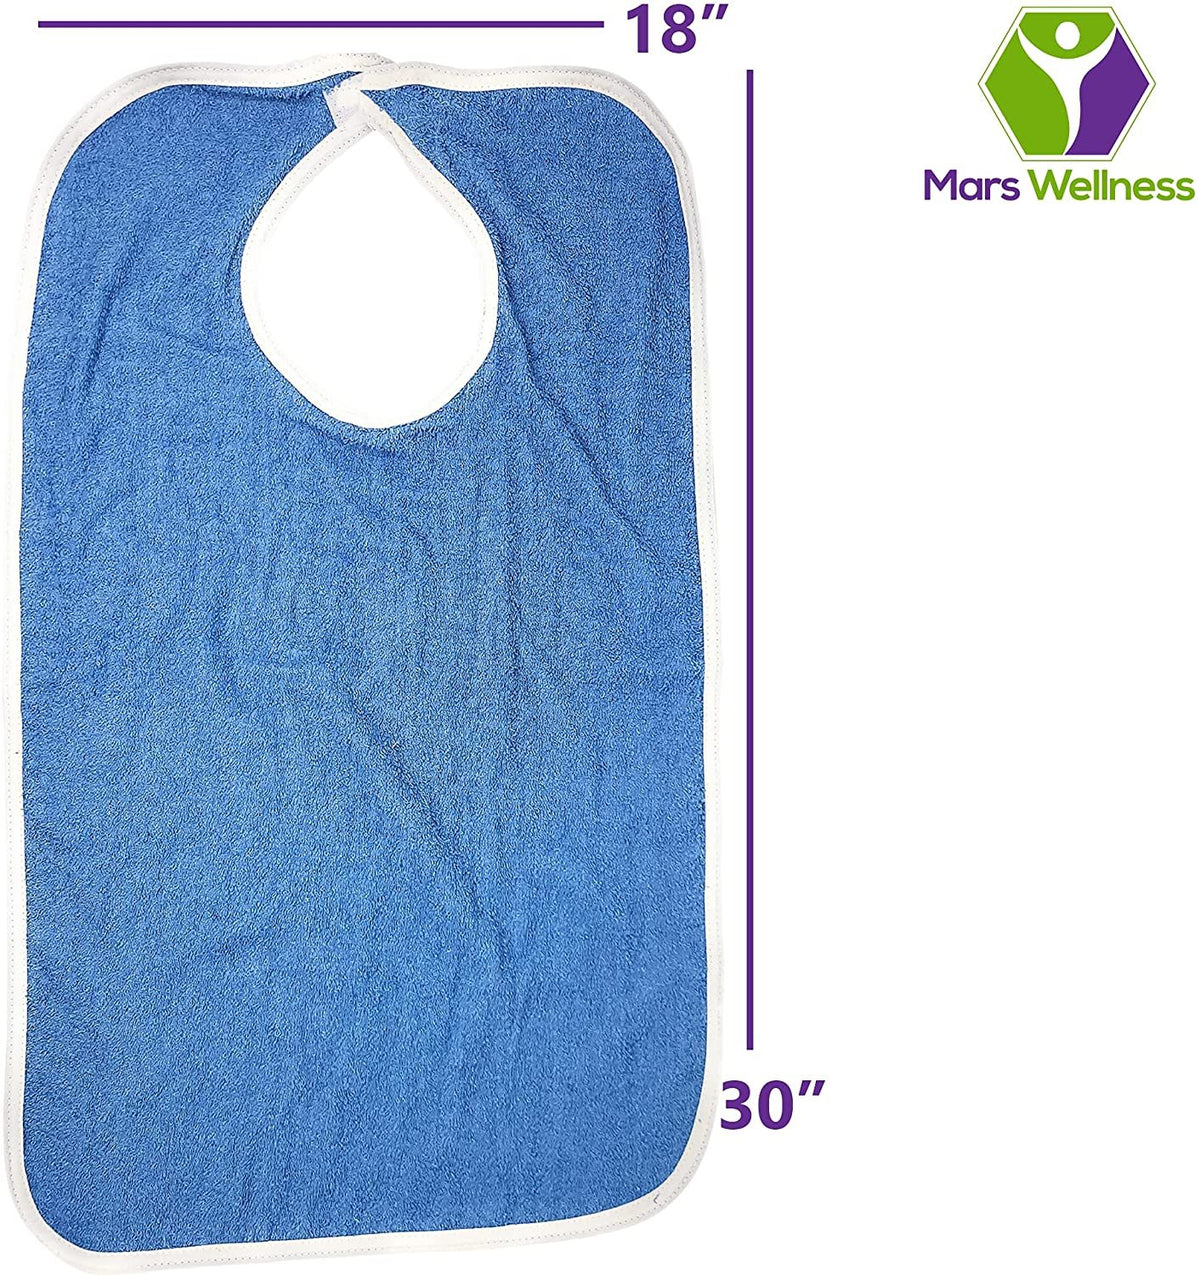 Mars Wellness Terry Adult Bibs 3 Pack - Large 18X30 Terry Cloth Bib for Adults - Elderly, Seniors, Disabled, Blue Clothing Protector for Men or Women - Mars Med Supply